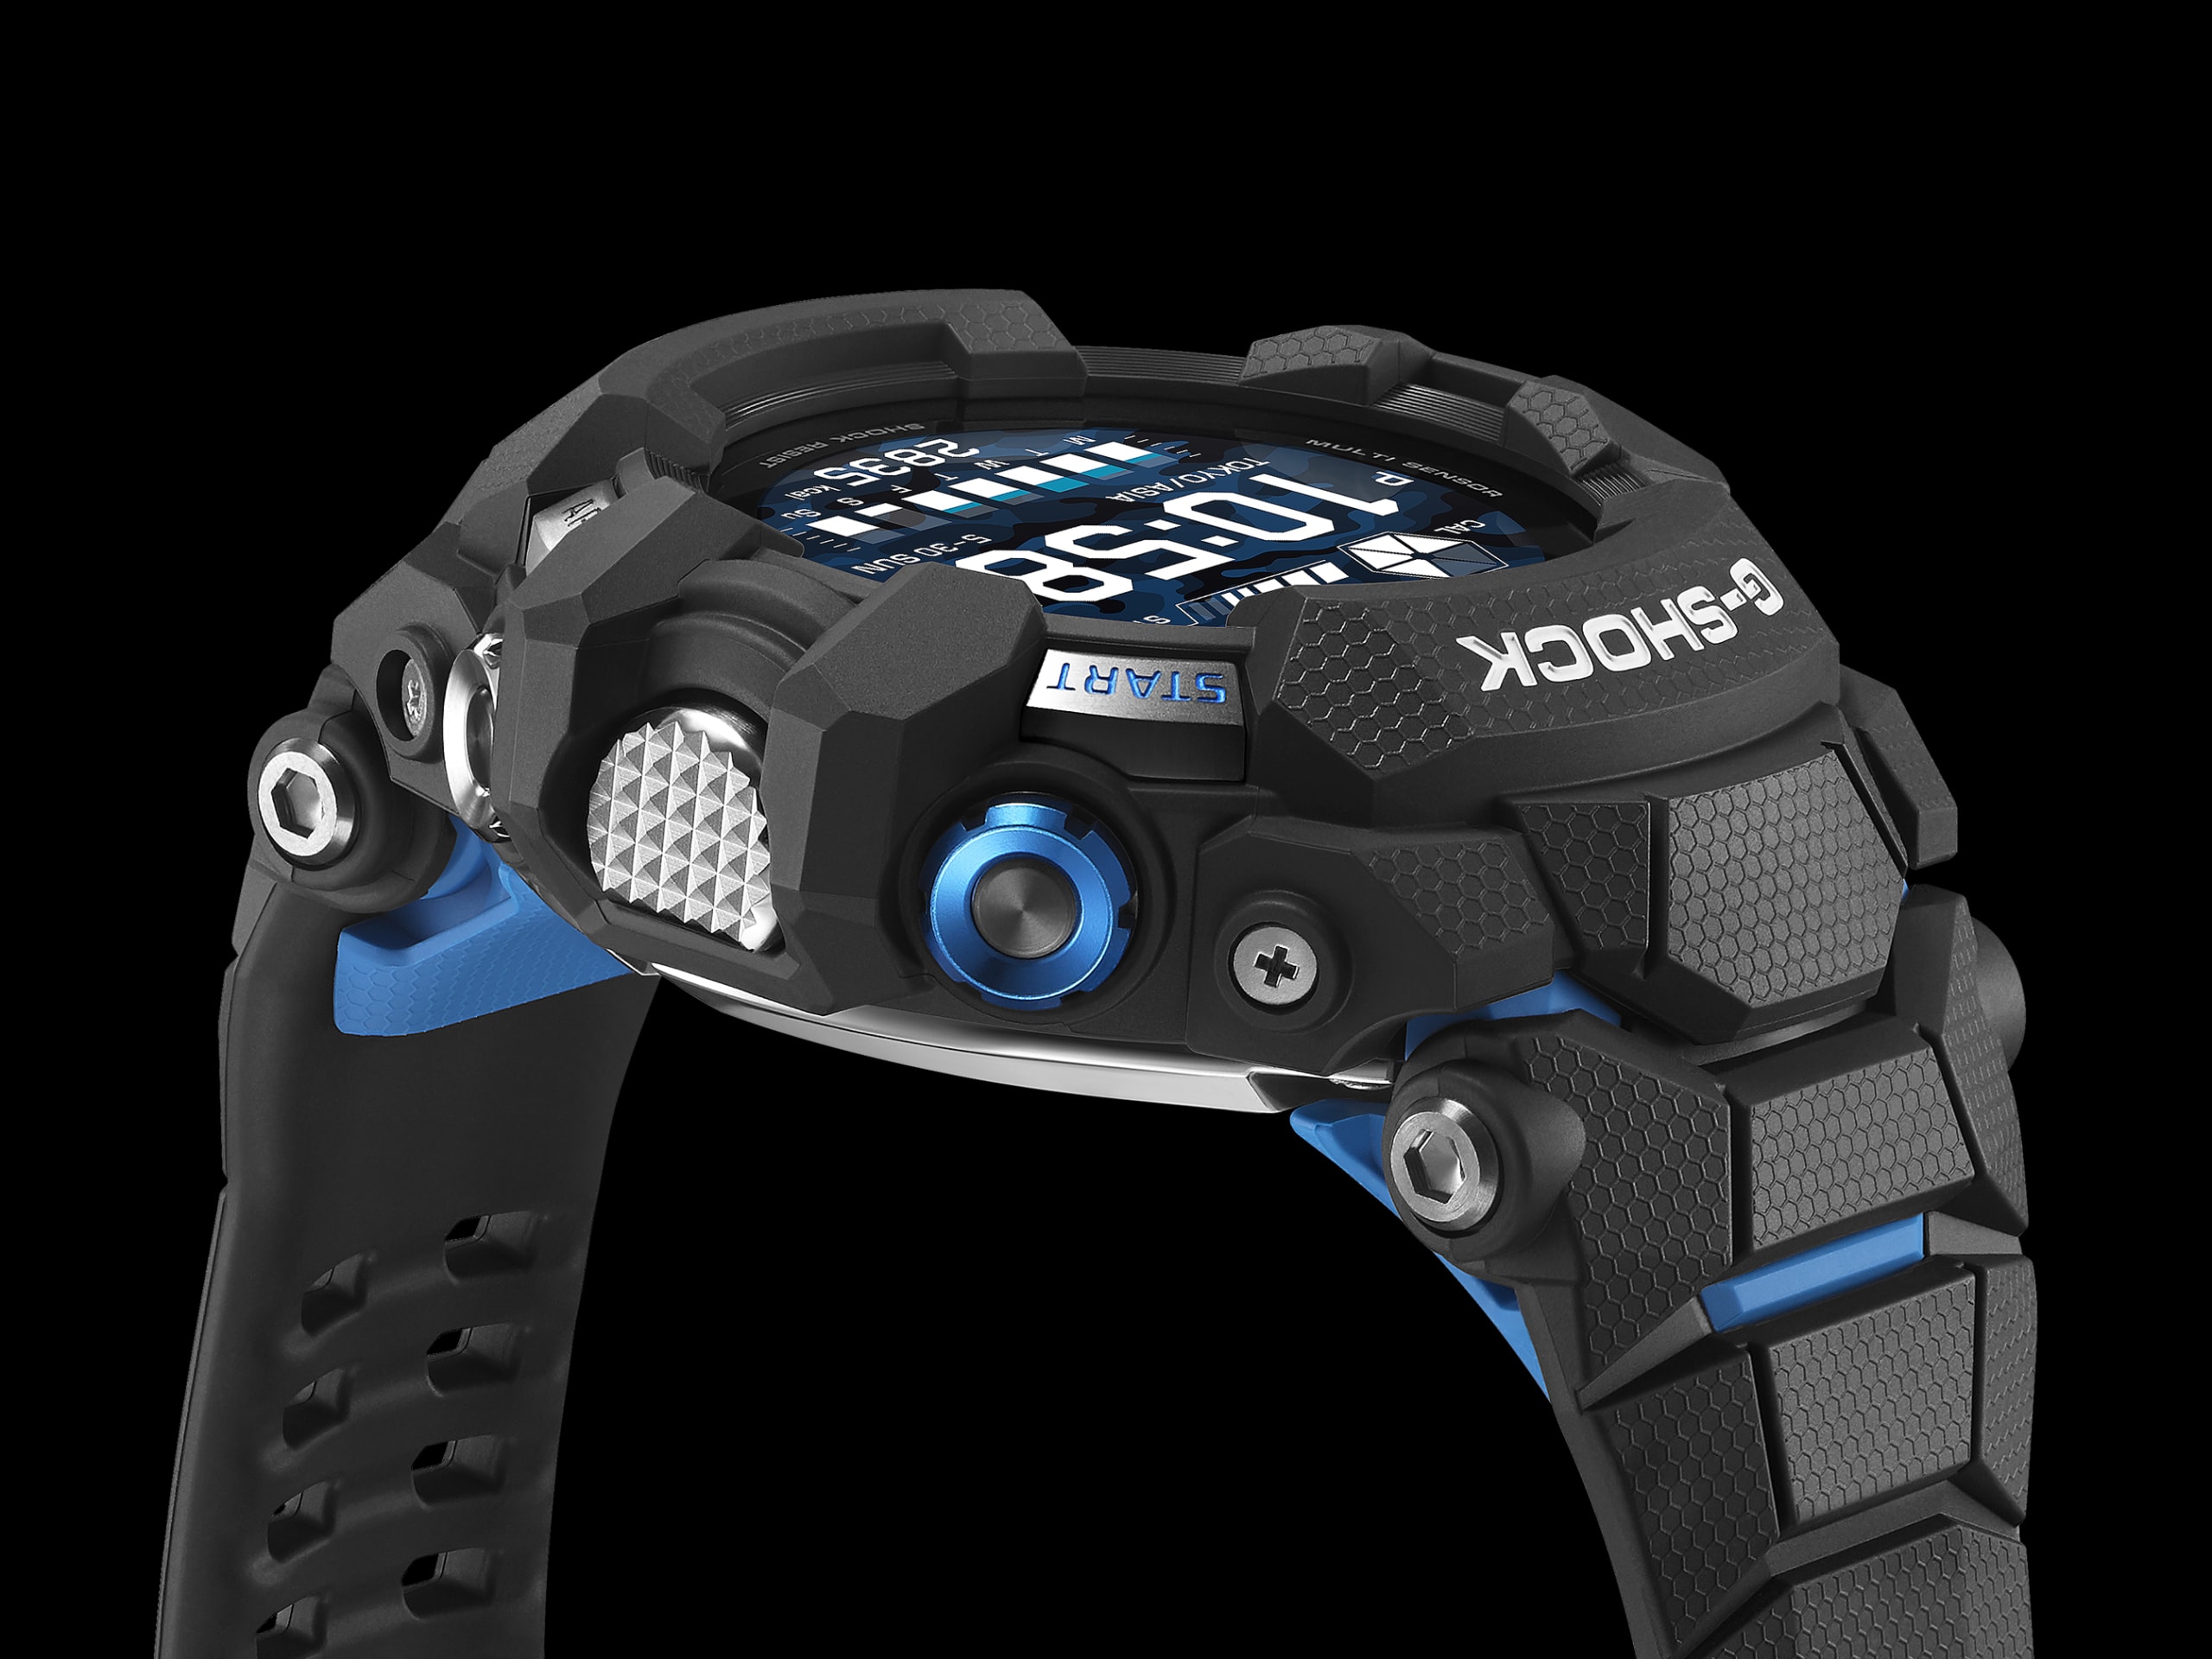 G-Shock Move Pro Gets Wear OS By Google